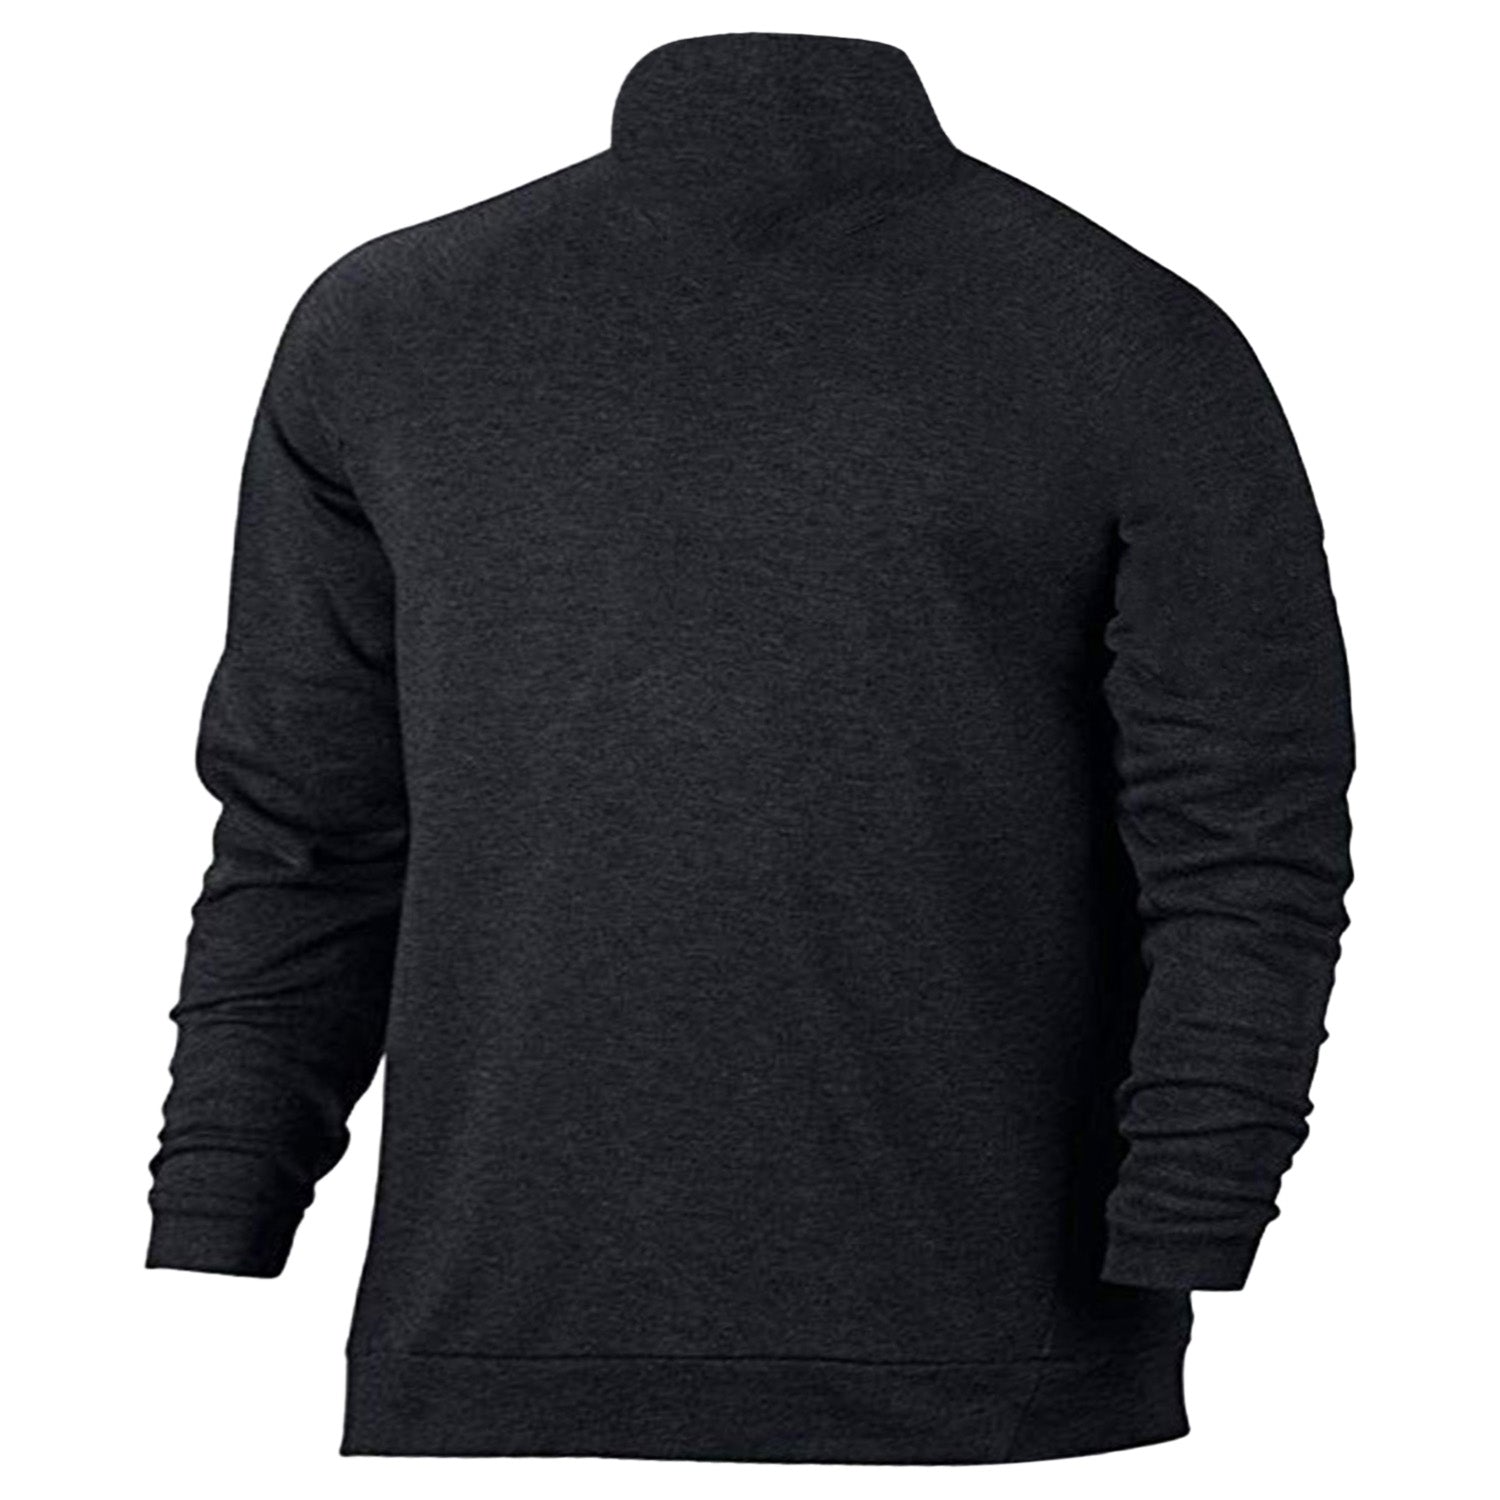 Nike Dry Training Top Mens Style : 860477-032